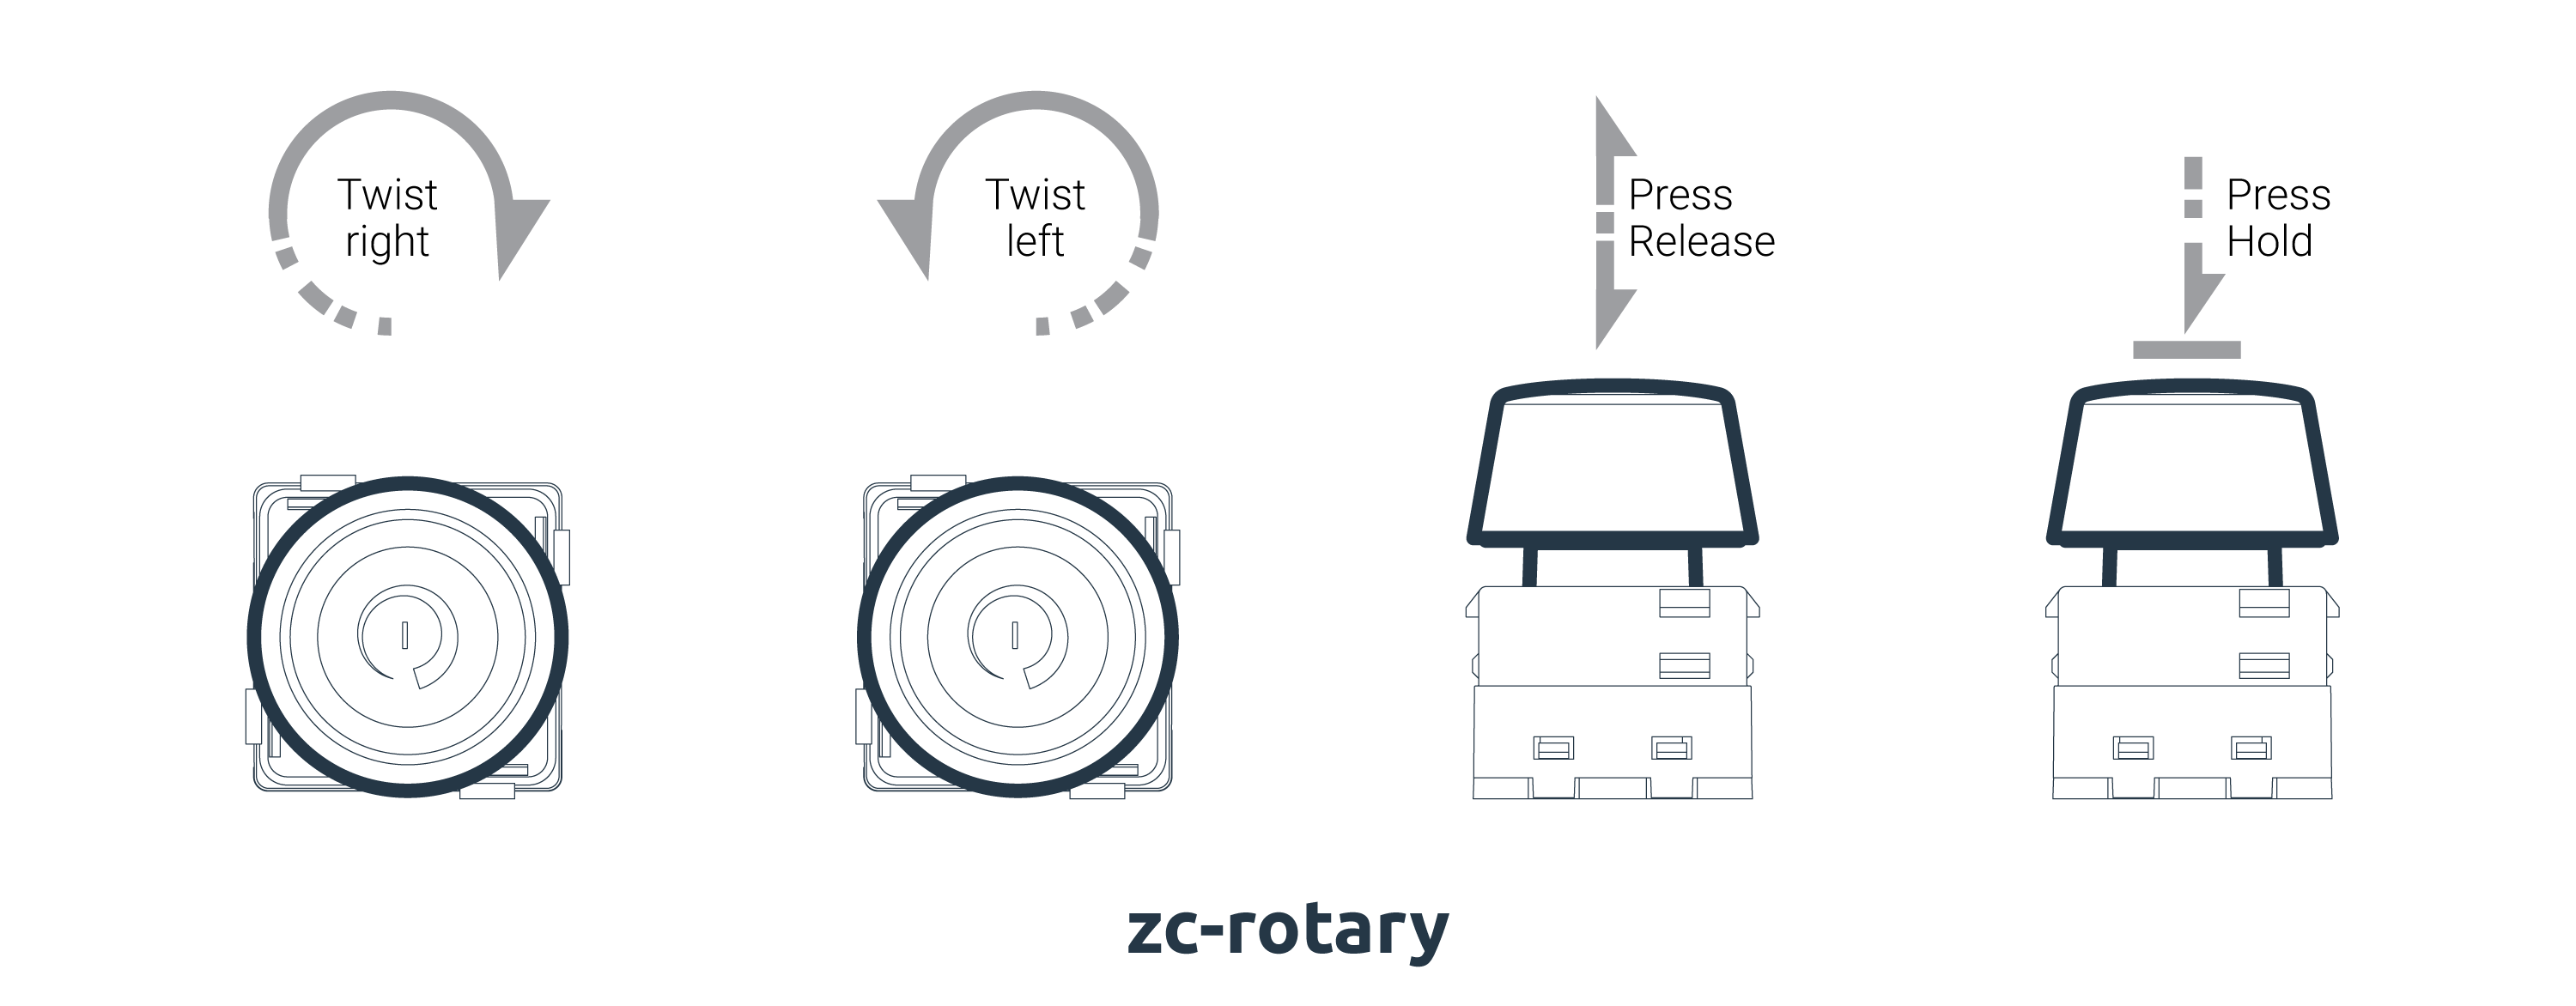 zc-rotary_wiring-n-actions-03.png